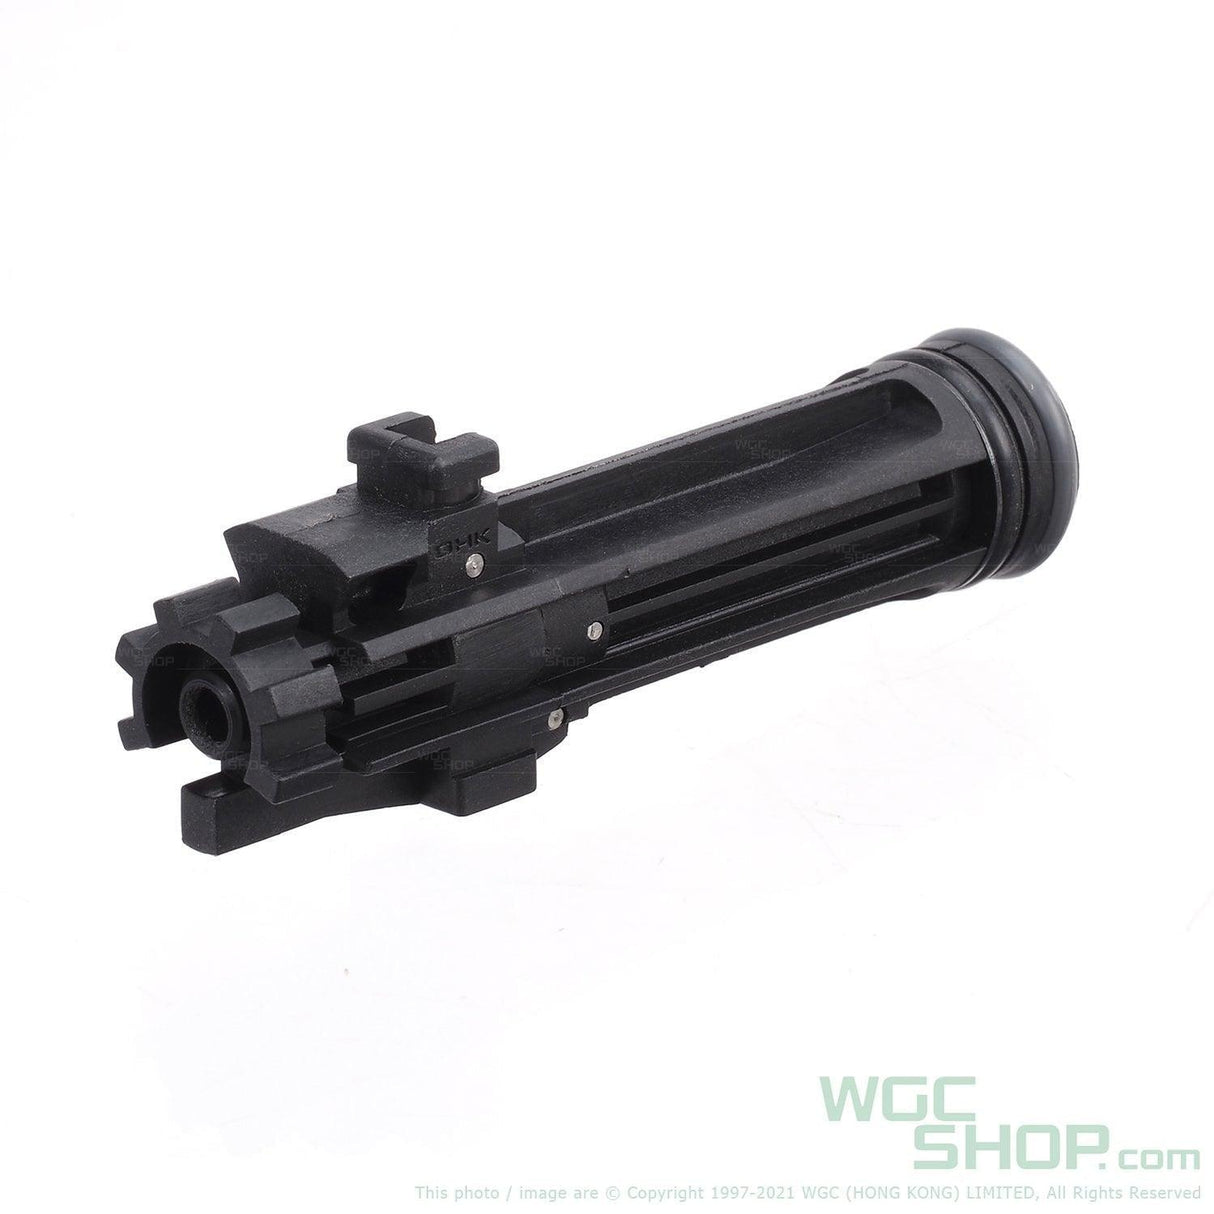 T-N.T. High Flow Loading Nozzle / Piston Set for GHK GBBR - WGC Shop